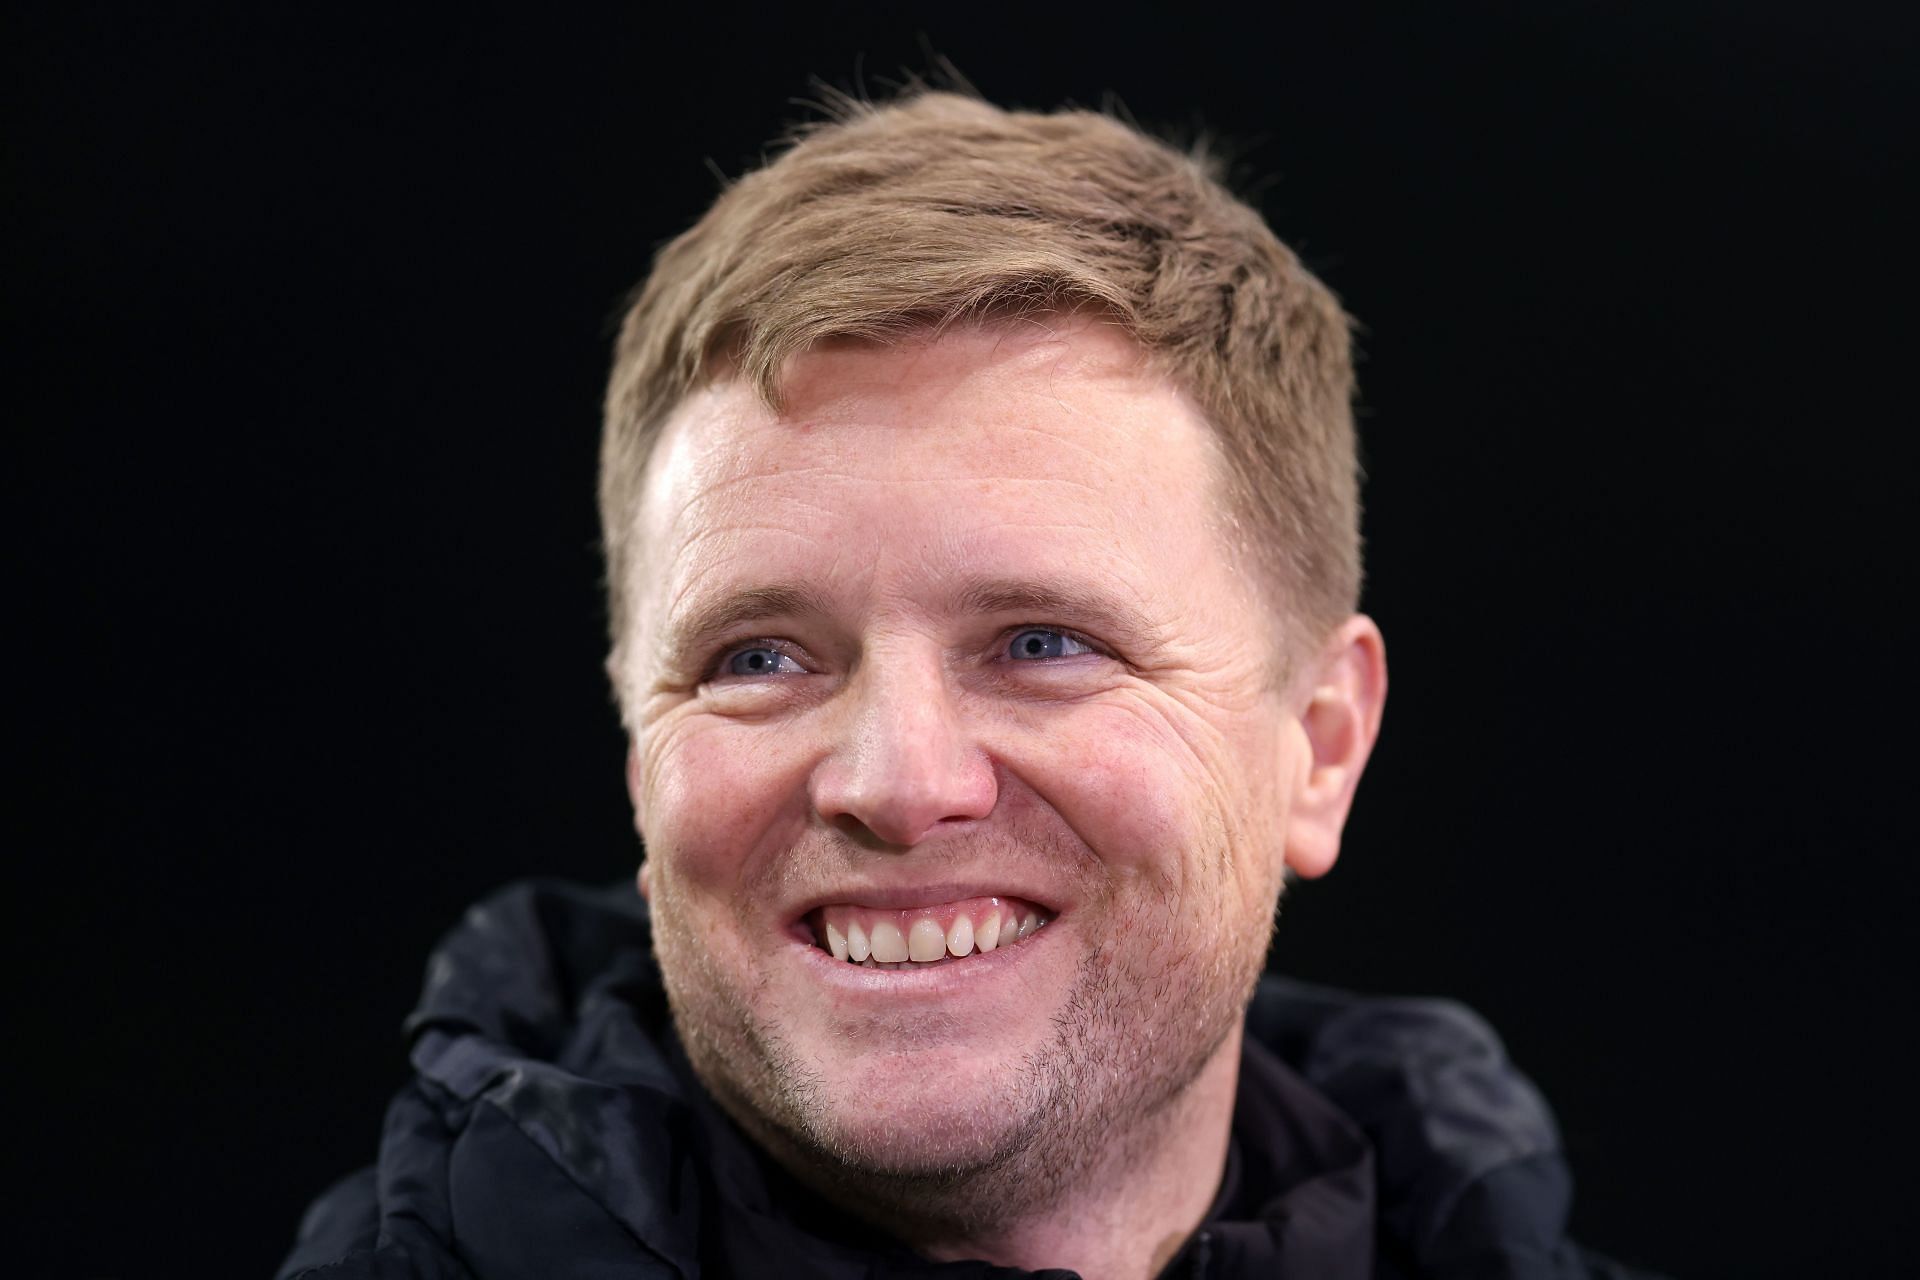 Newcastle United manager Eddie Howe reacts v Leicester City - Carabao Cup Quarter Final